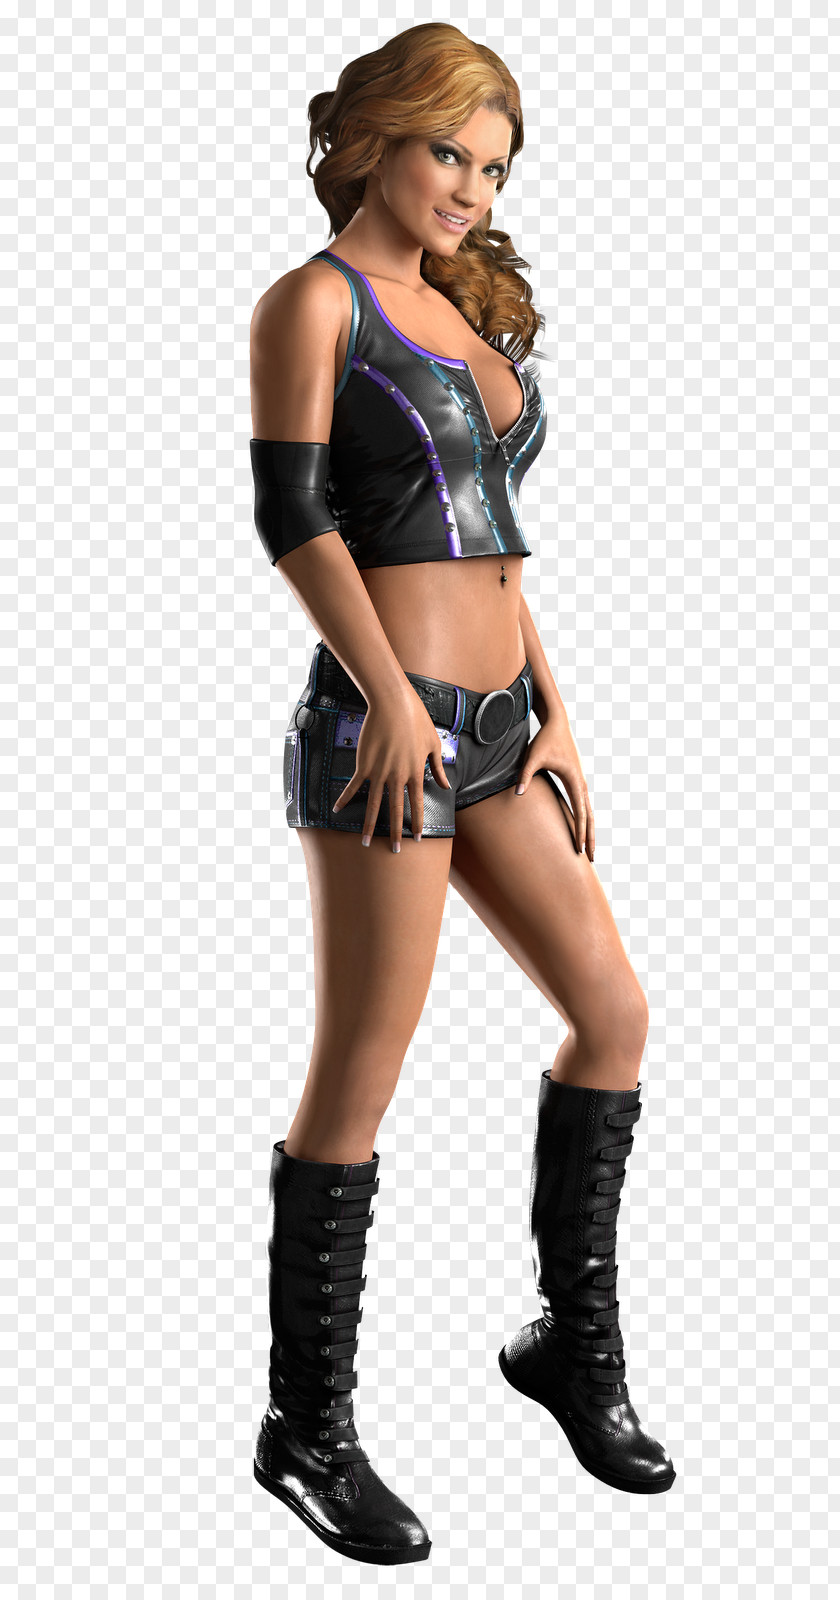 WWE SmackDown Vs. Raw 2011 SmackDown! 2010 Eve Torres PNG vs. Torres, jeff hardy clipart PNG